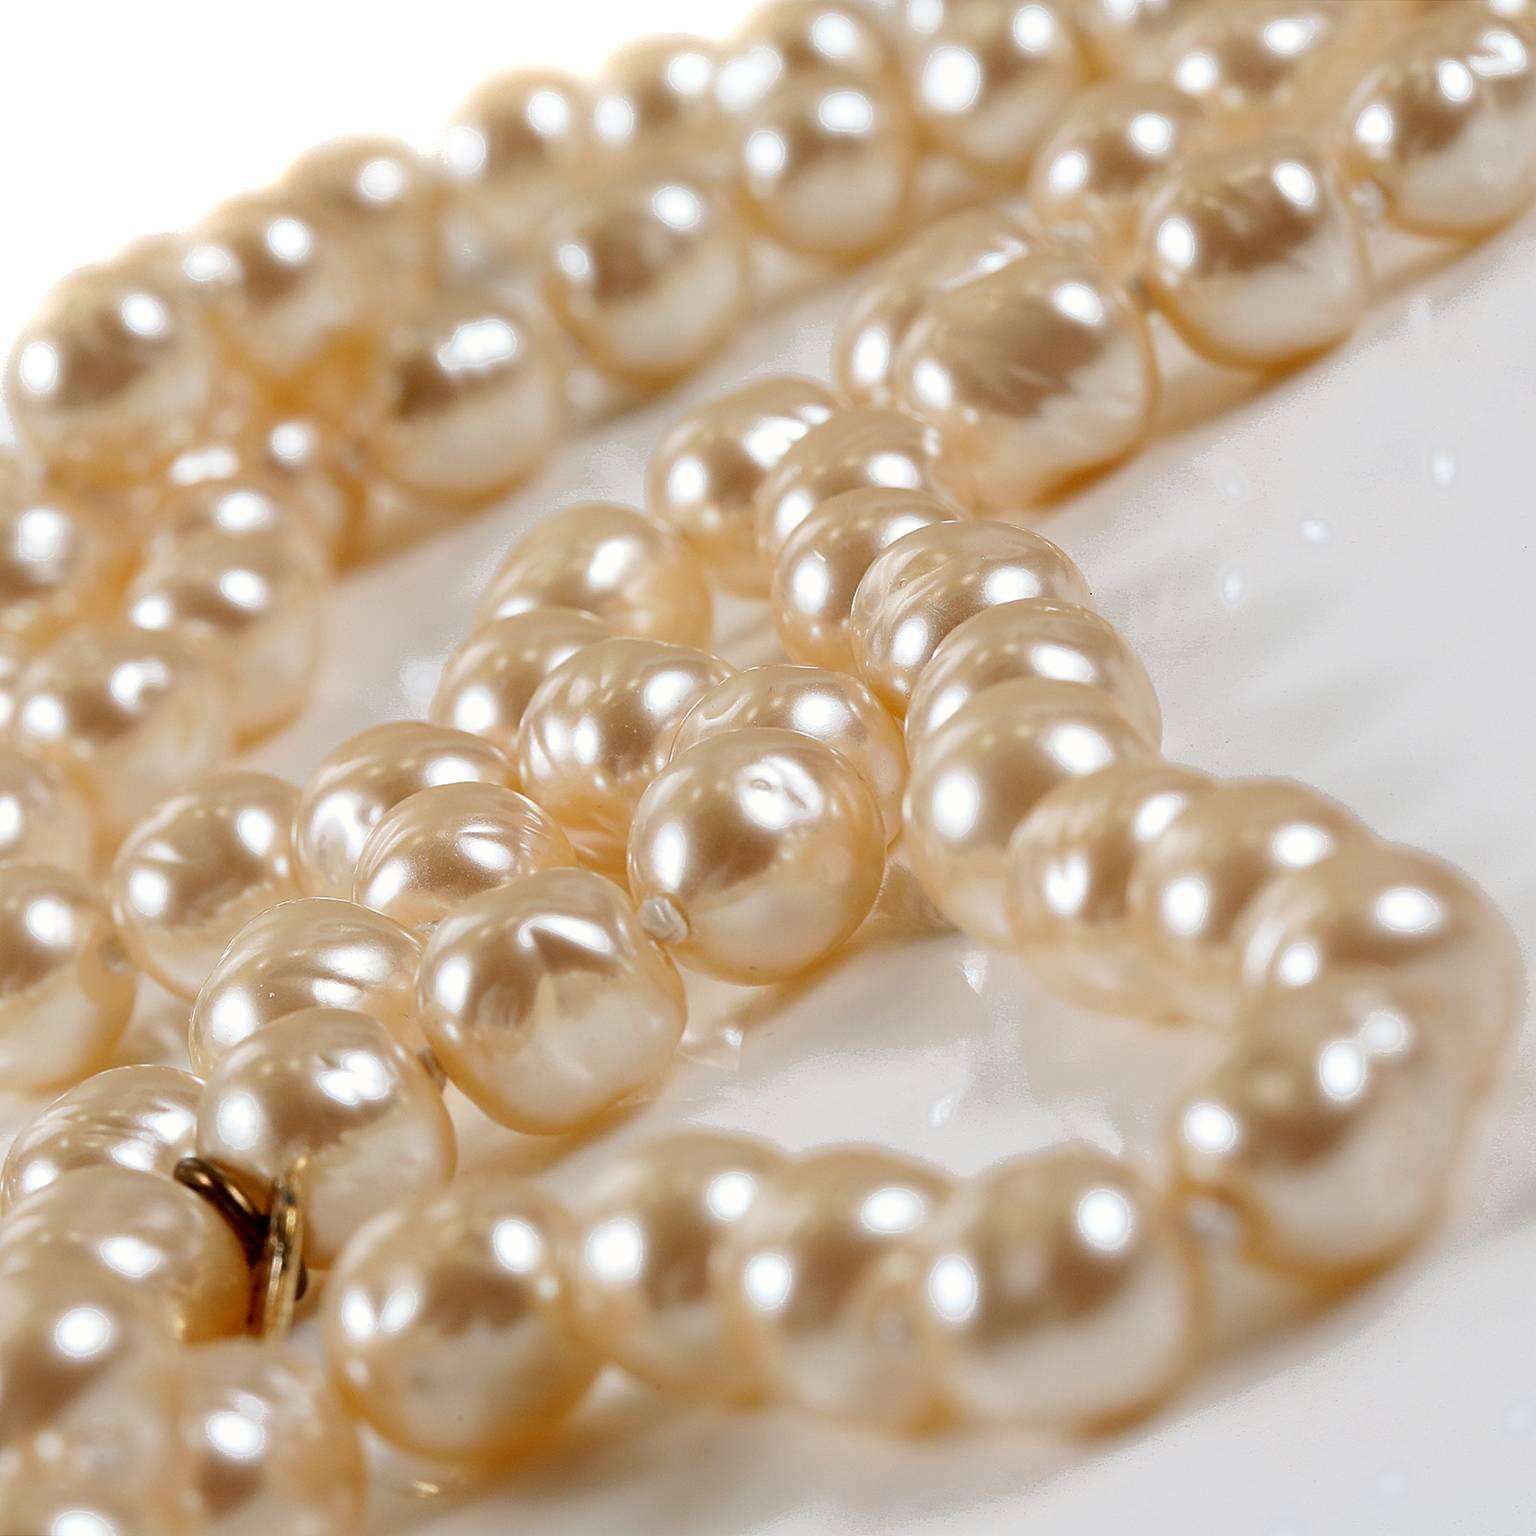 Chanel Champagne Baroque Pearl Necklace-Mint Vintage Condition
  From 1981, this piece has proven to be a timeless collectible.  
Large baroque long pearl strand in dreamy champagne color.  18 inches, 36 inches end to end. 
A209
